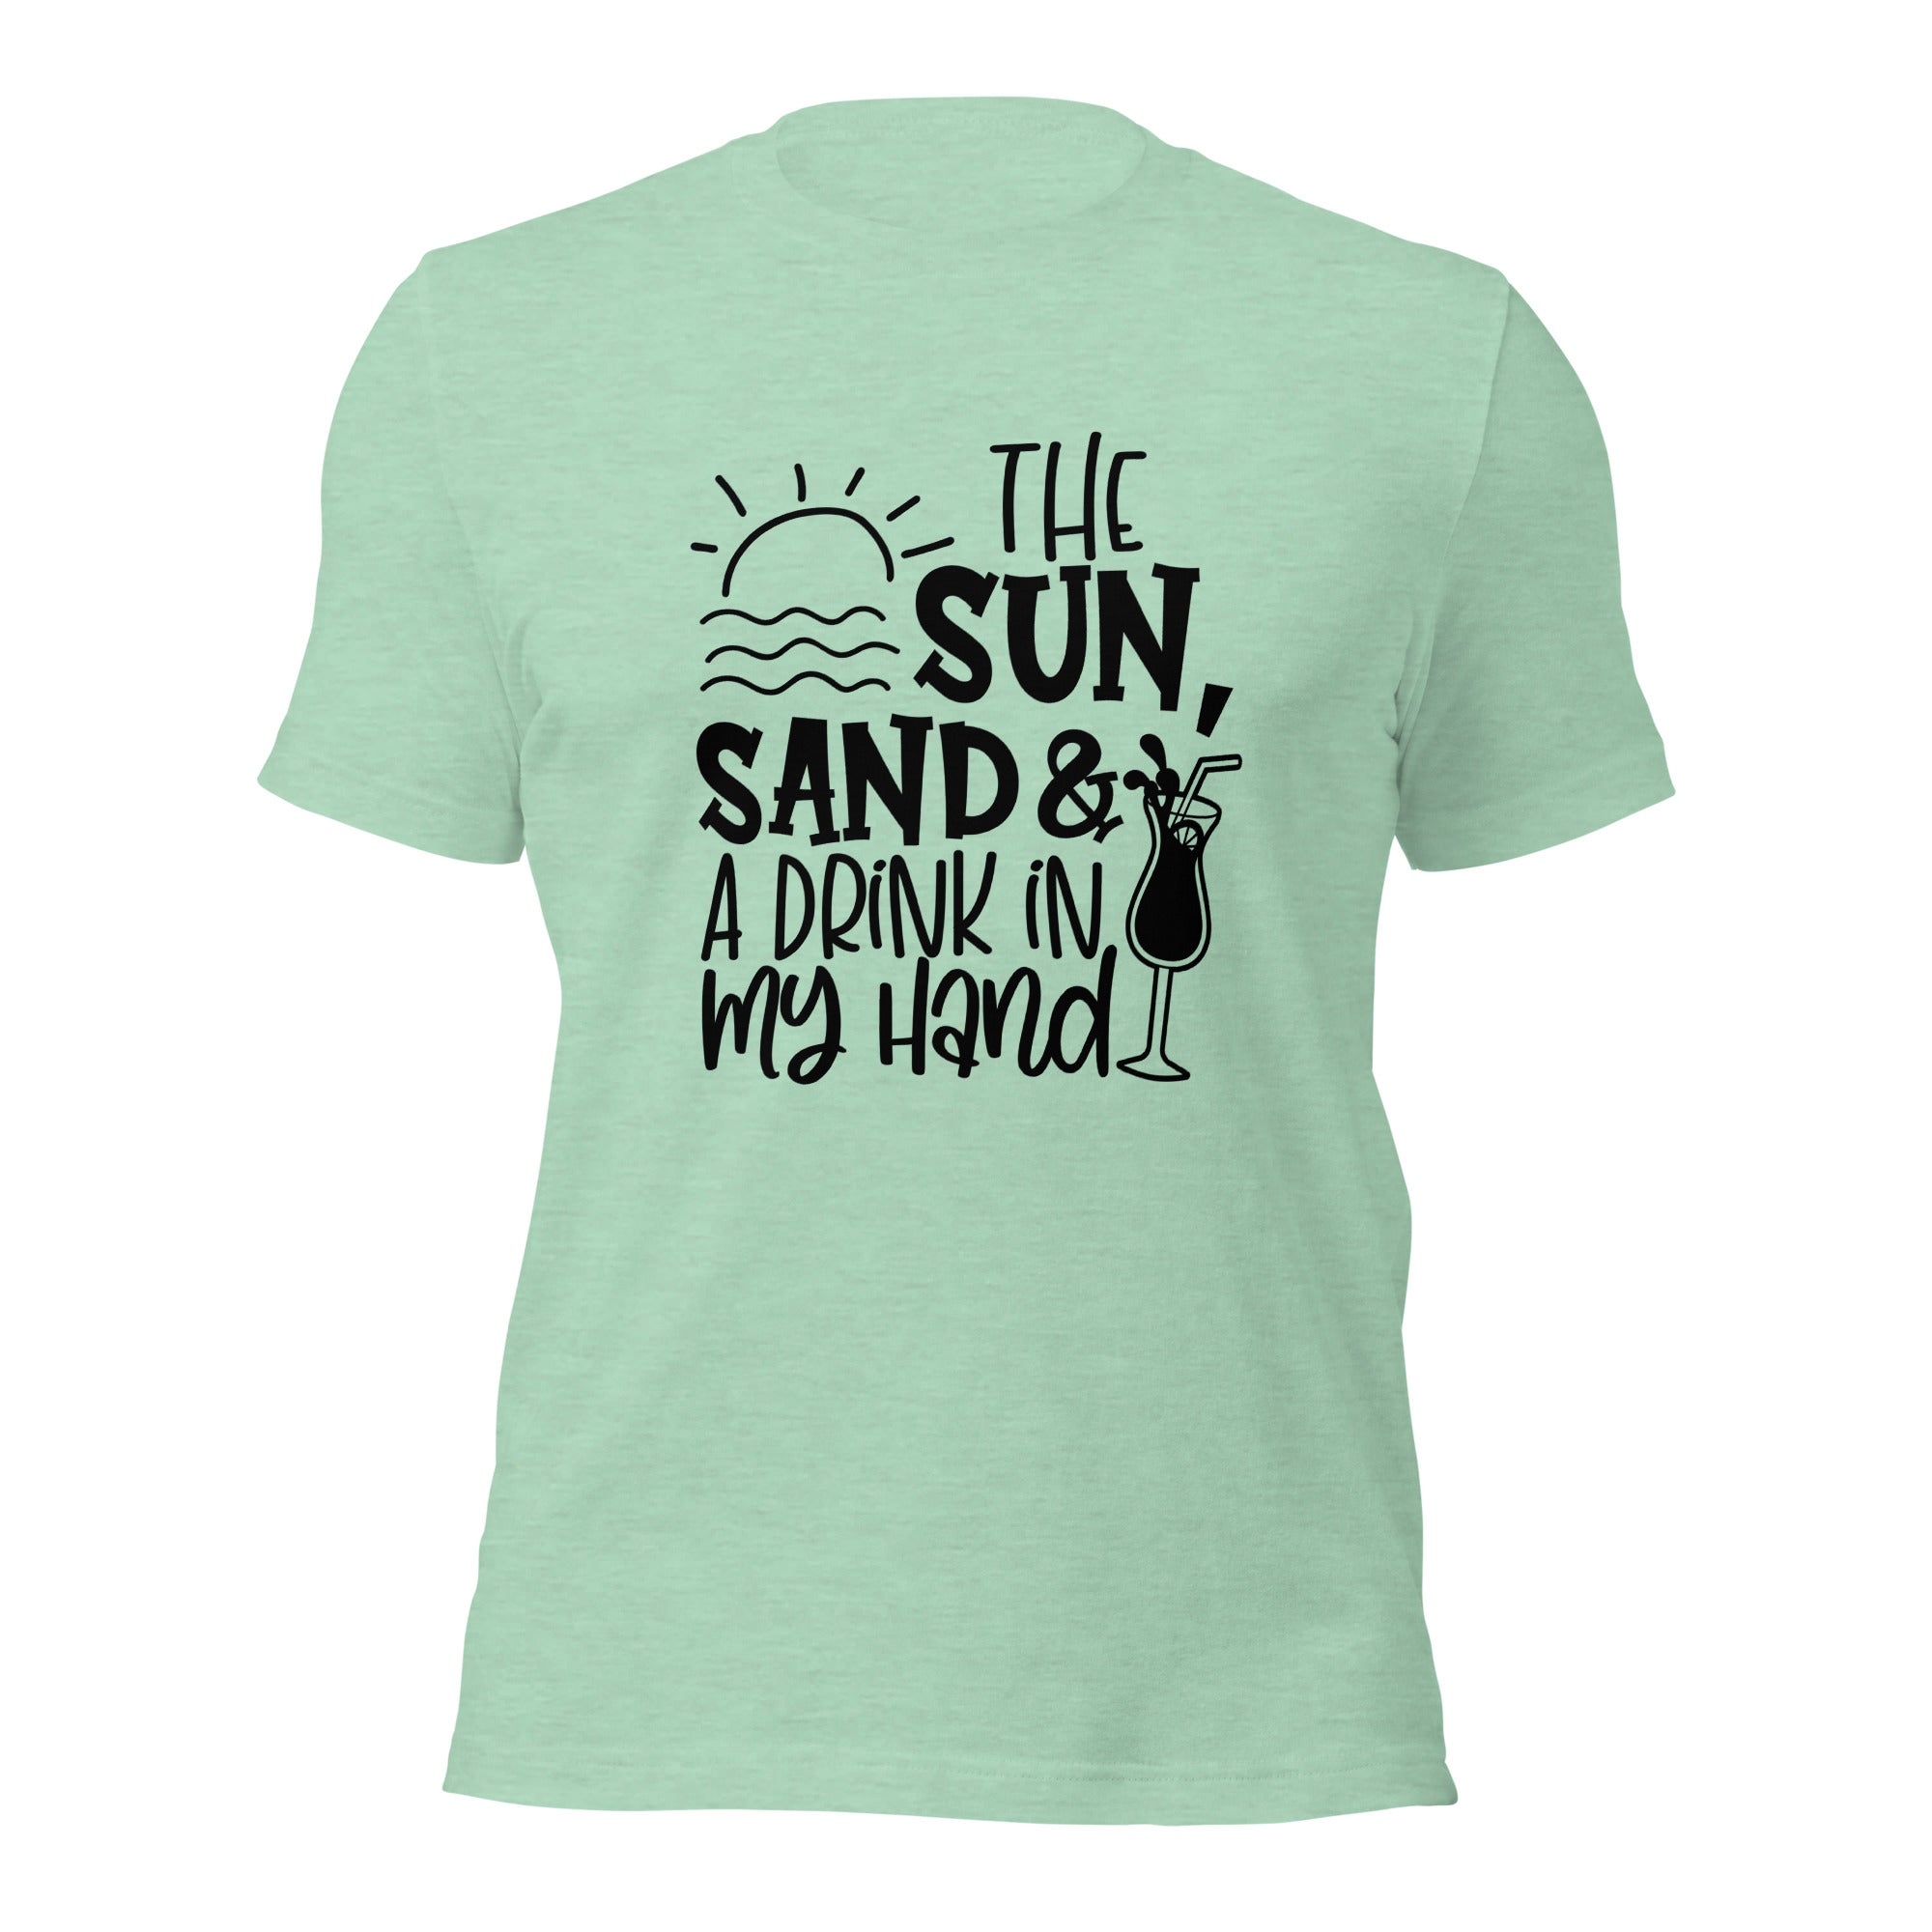 The Sun, Sand And a Drink In my Hand T-Shirt